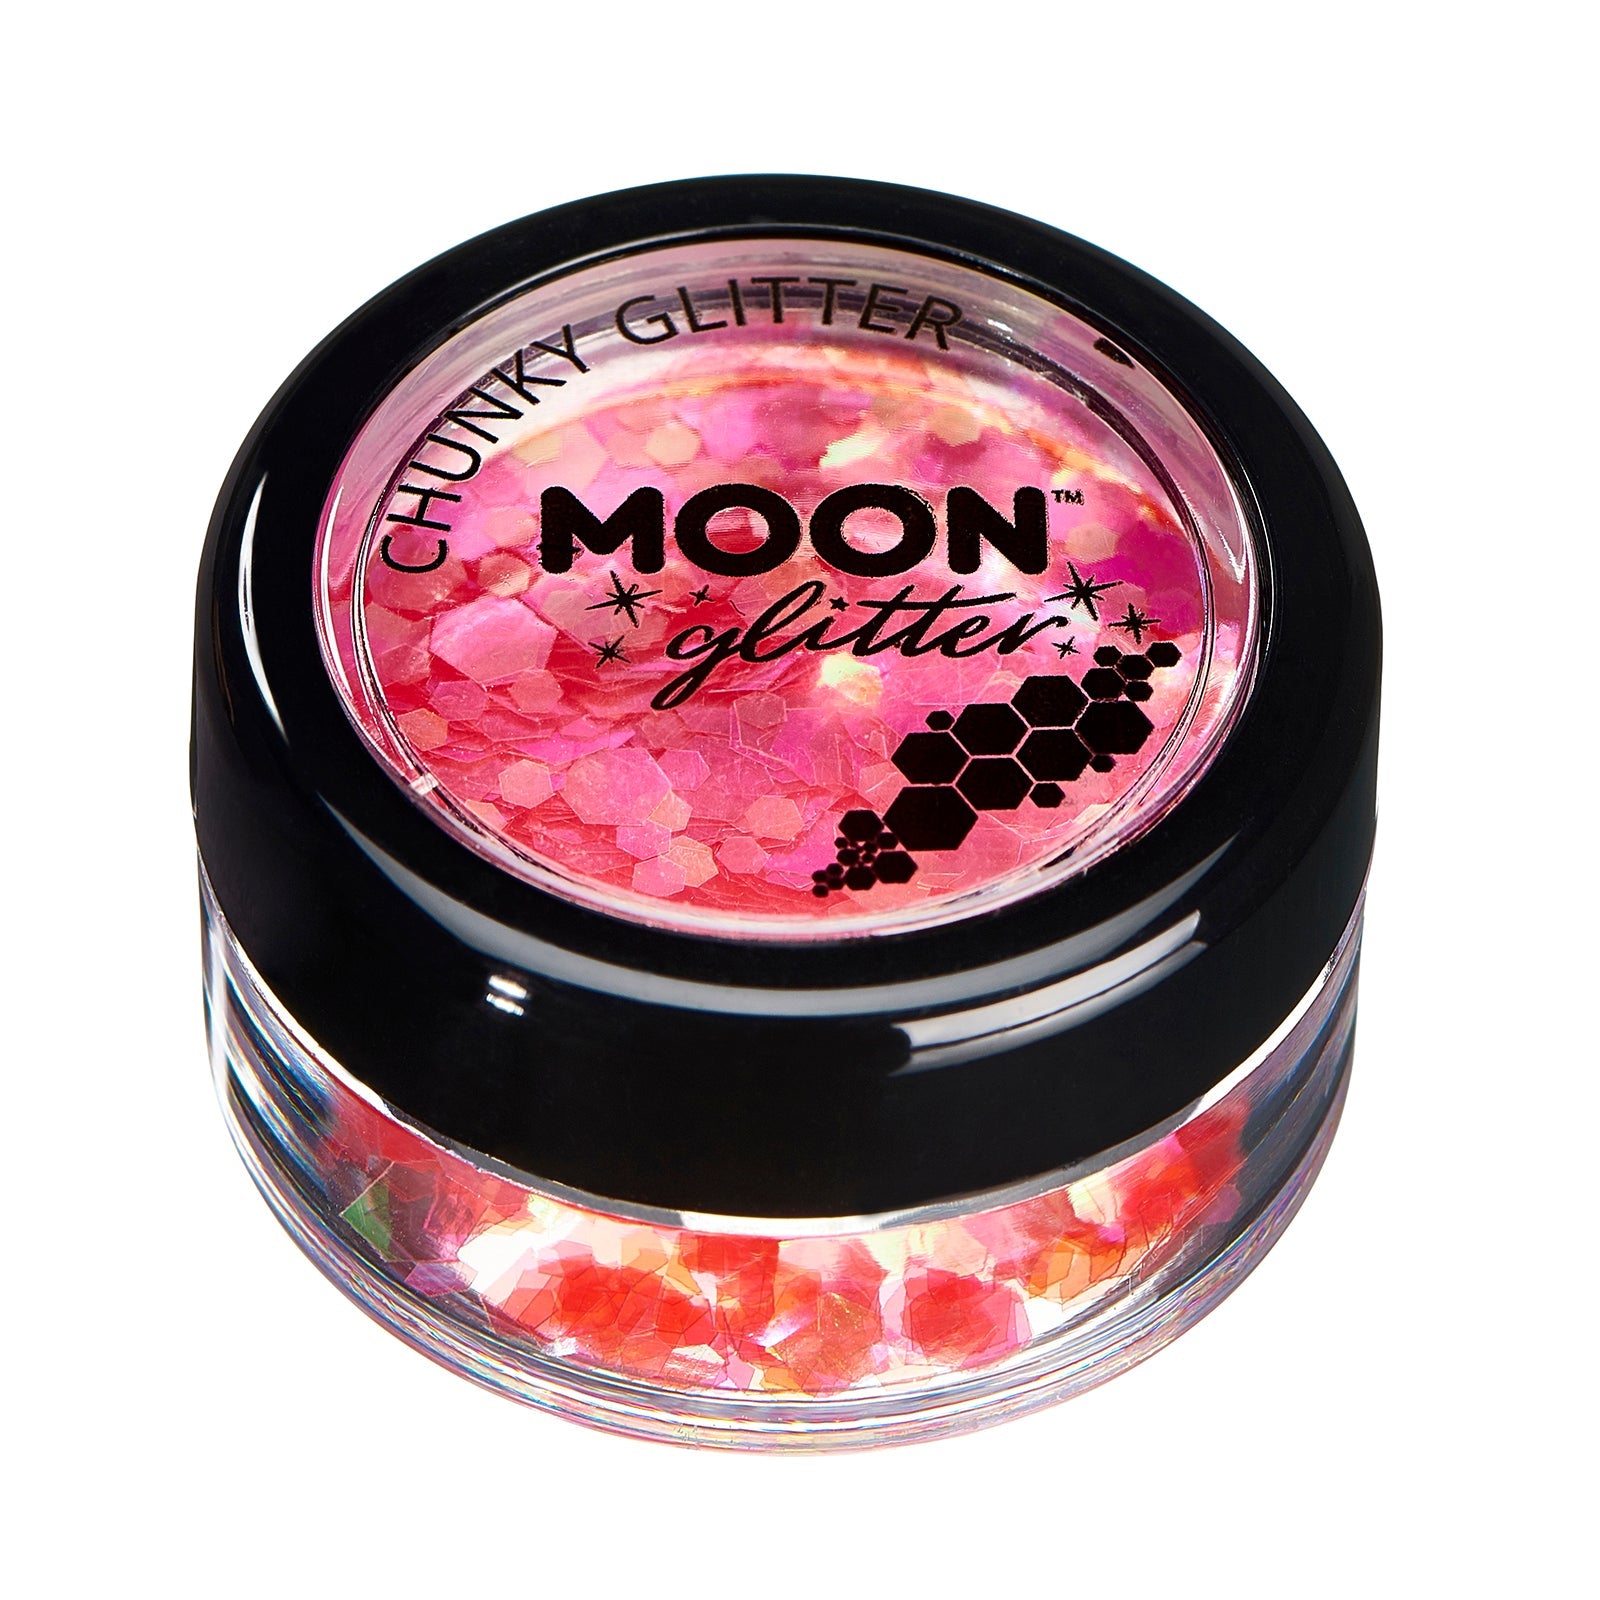 Cherry - Iridescent Chunky Face & Body Glitter, 3g. Cosmetically certified, FDA & Health Canada compliant, cruelty free and vegan.